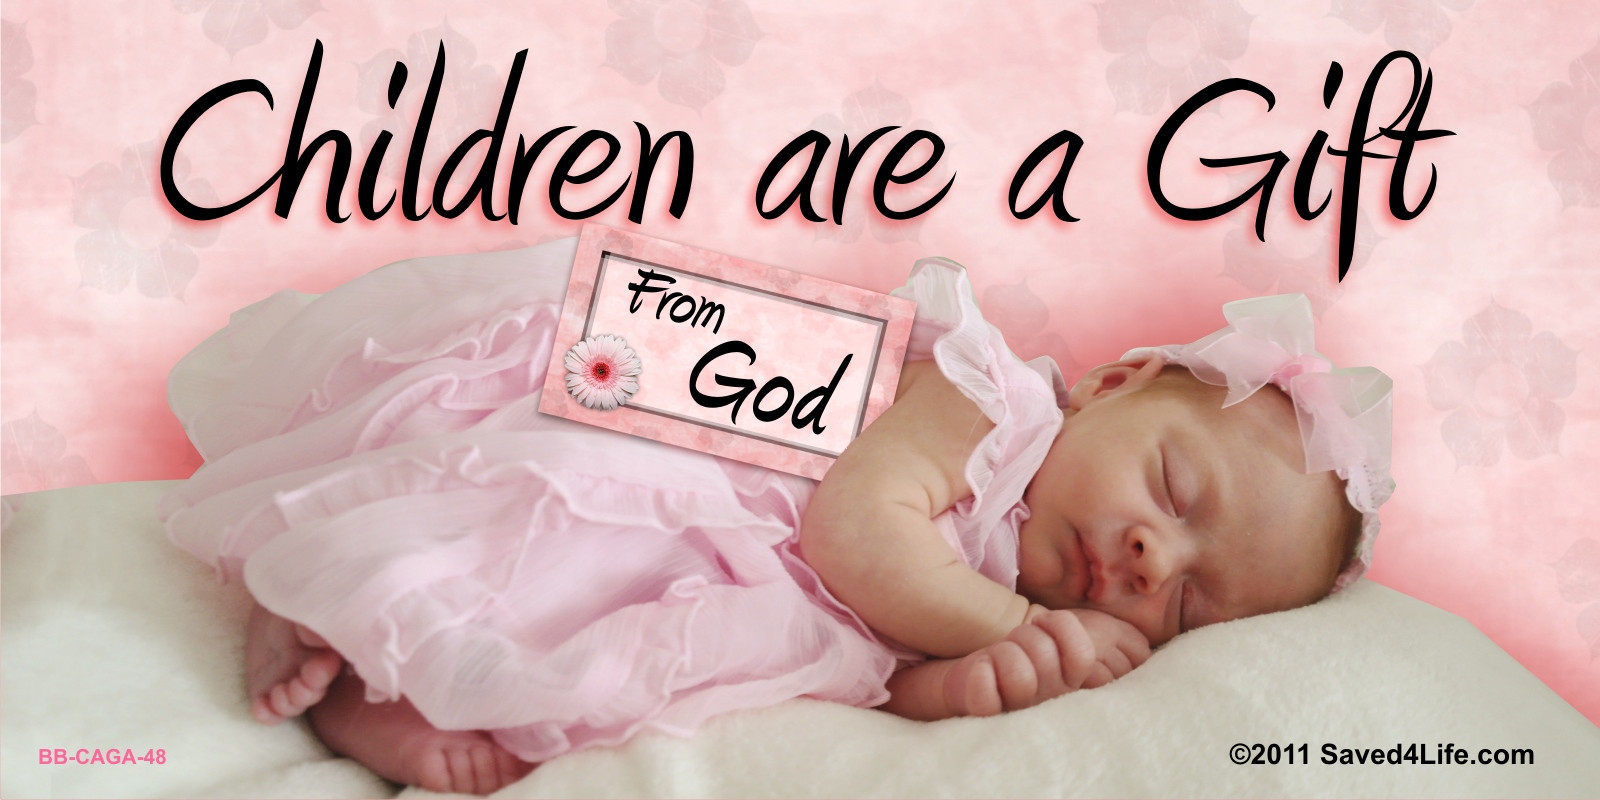 Child Gift From God
 Just saw a gem of a bumper sticker childfree